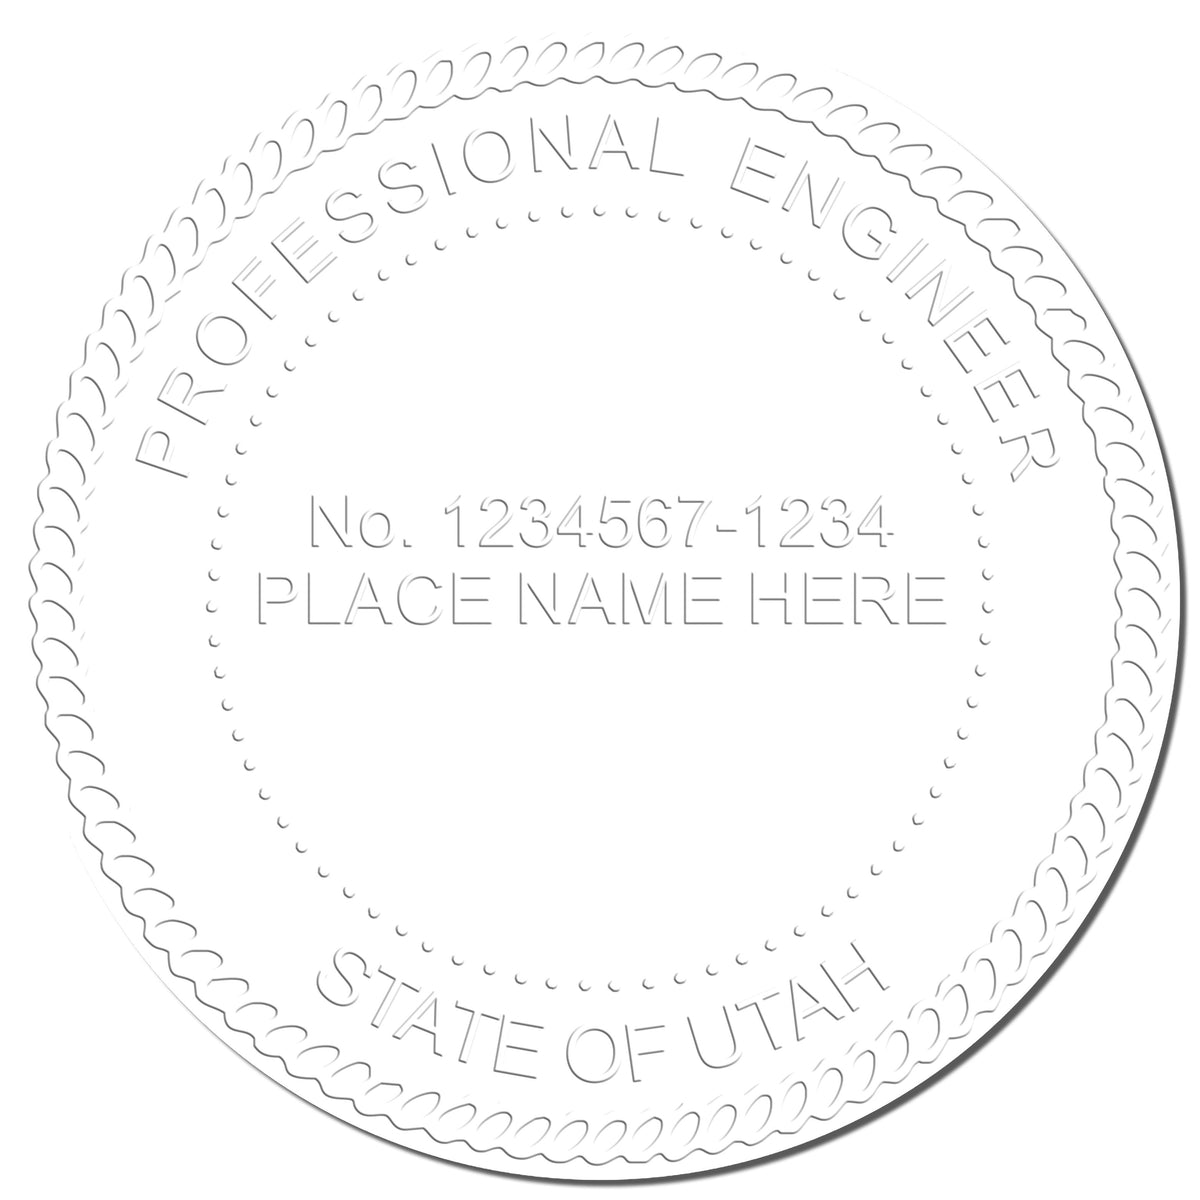 The Soft Utah Professional Engineer Seal stamp impression comes to life with a crisp, detailed photo on paper - showcasing true professional quality.